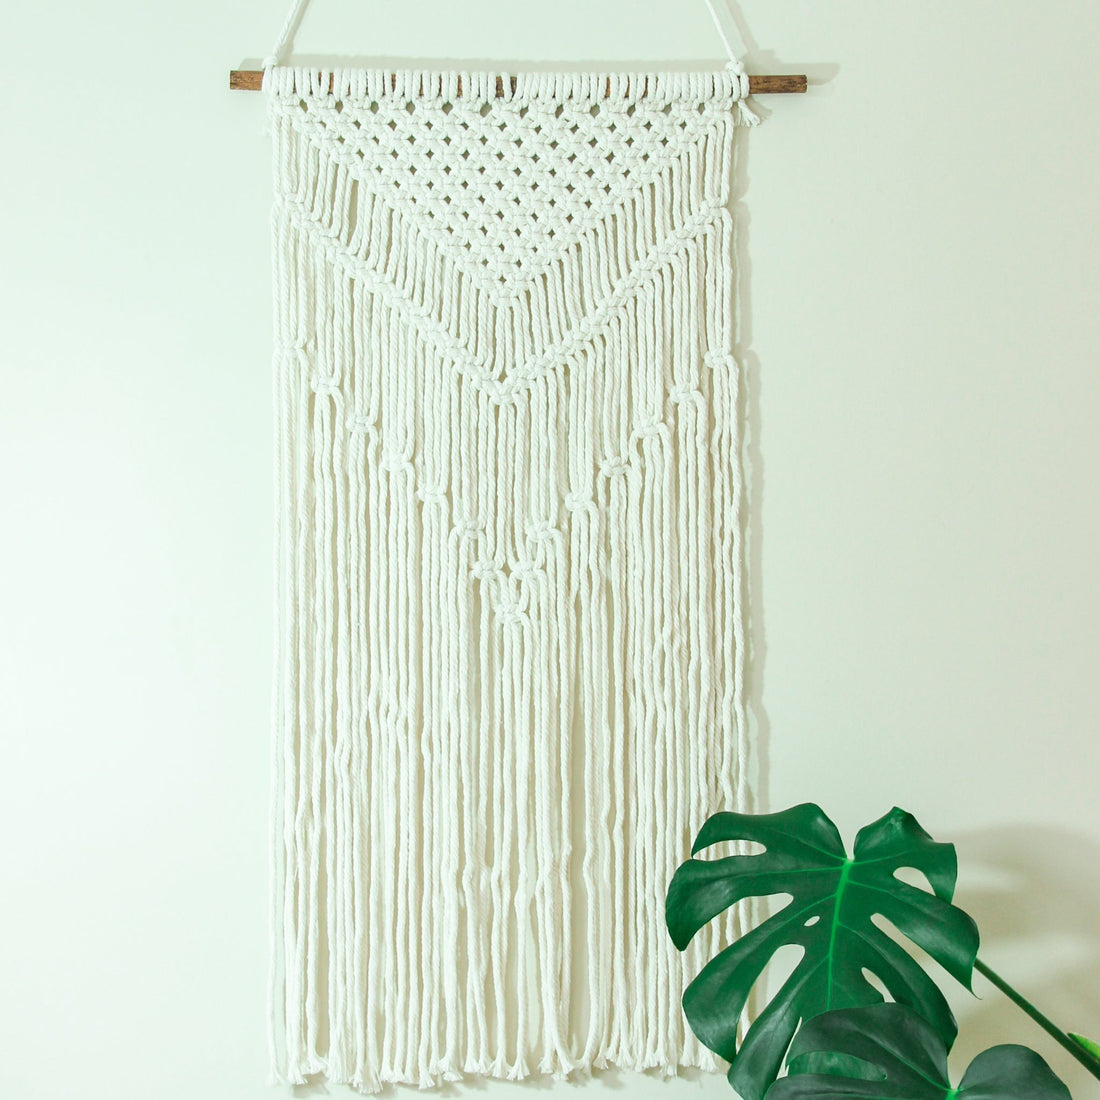 Table and Kitchen fair trade ethical sustainable fashion Macrame Wall Hanging conscious purchase Thai Village